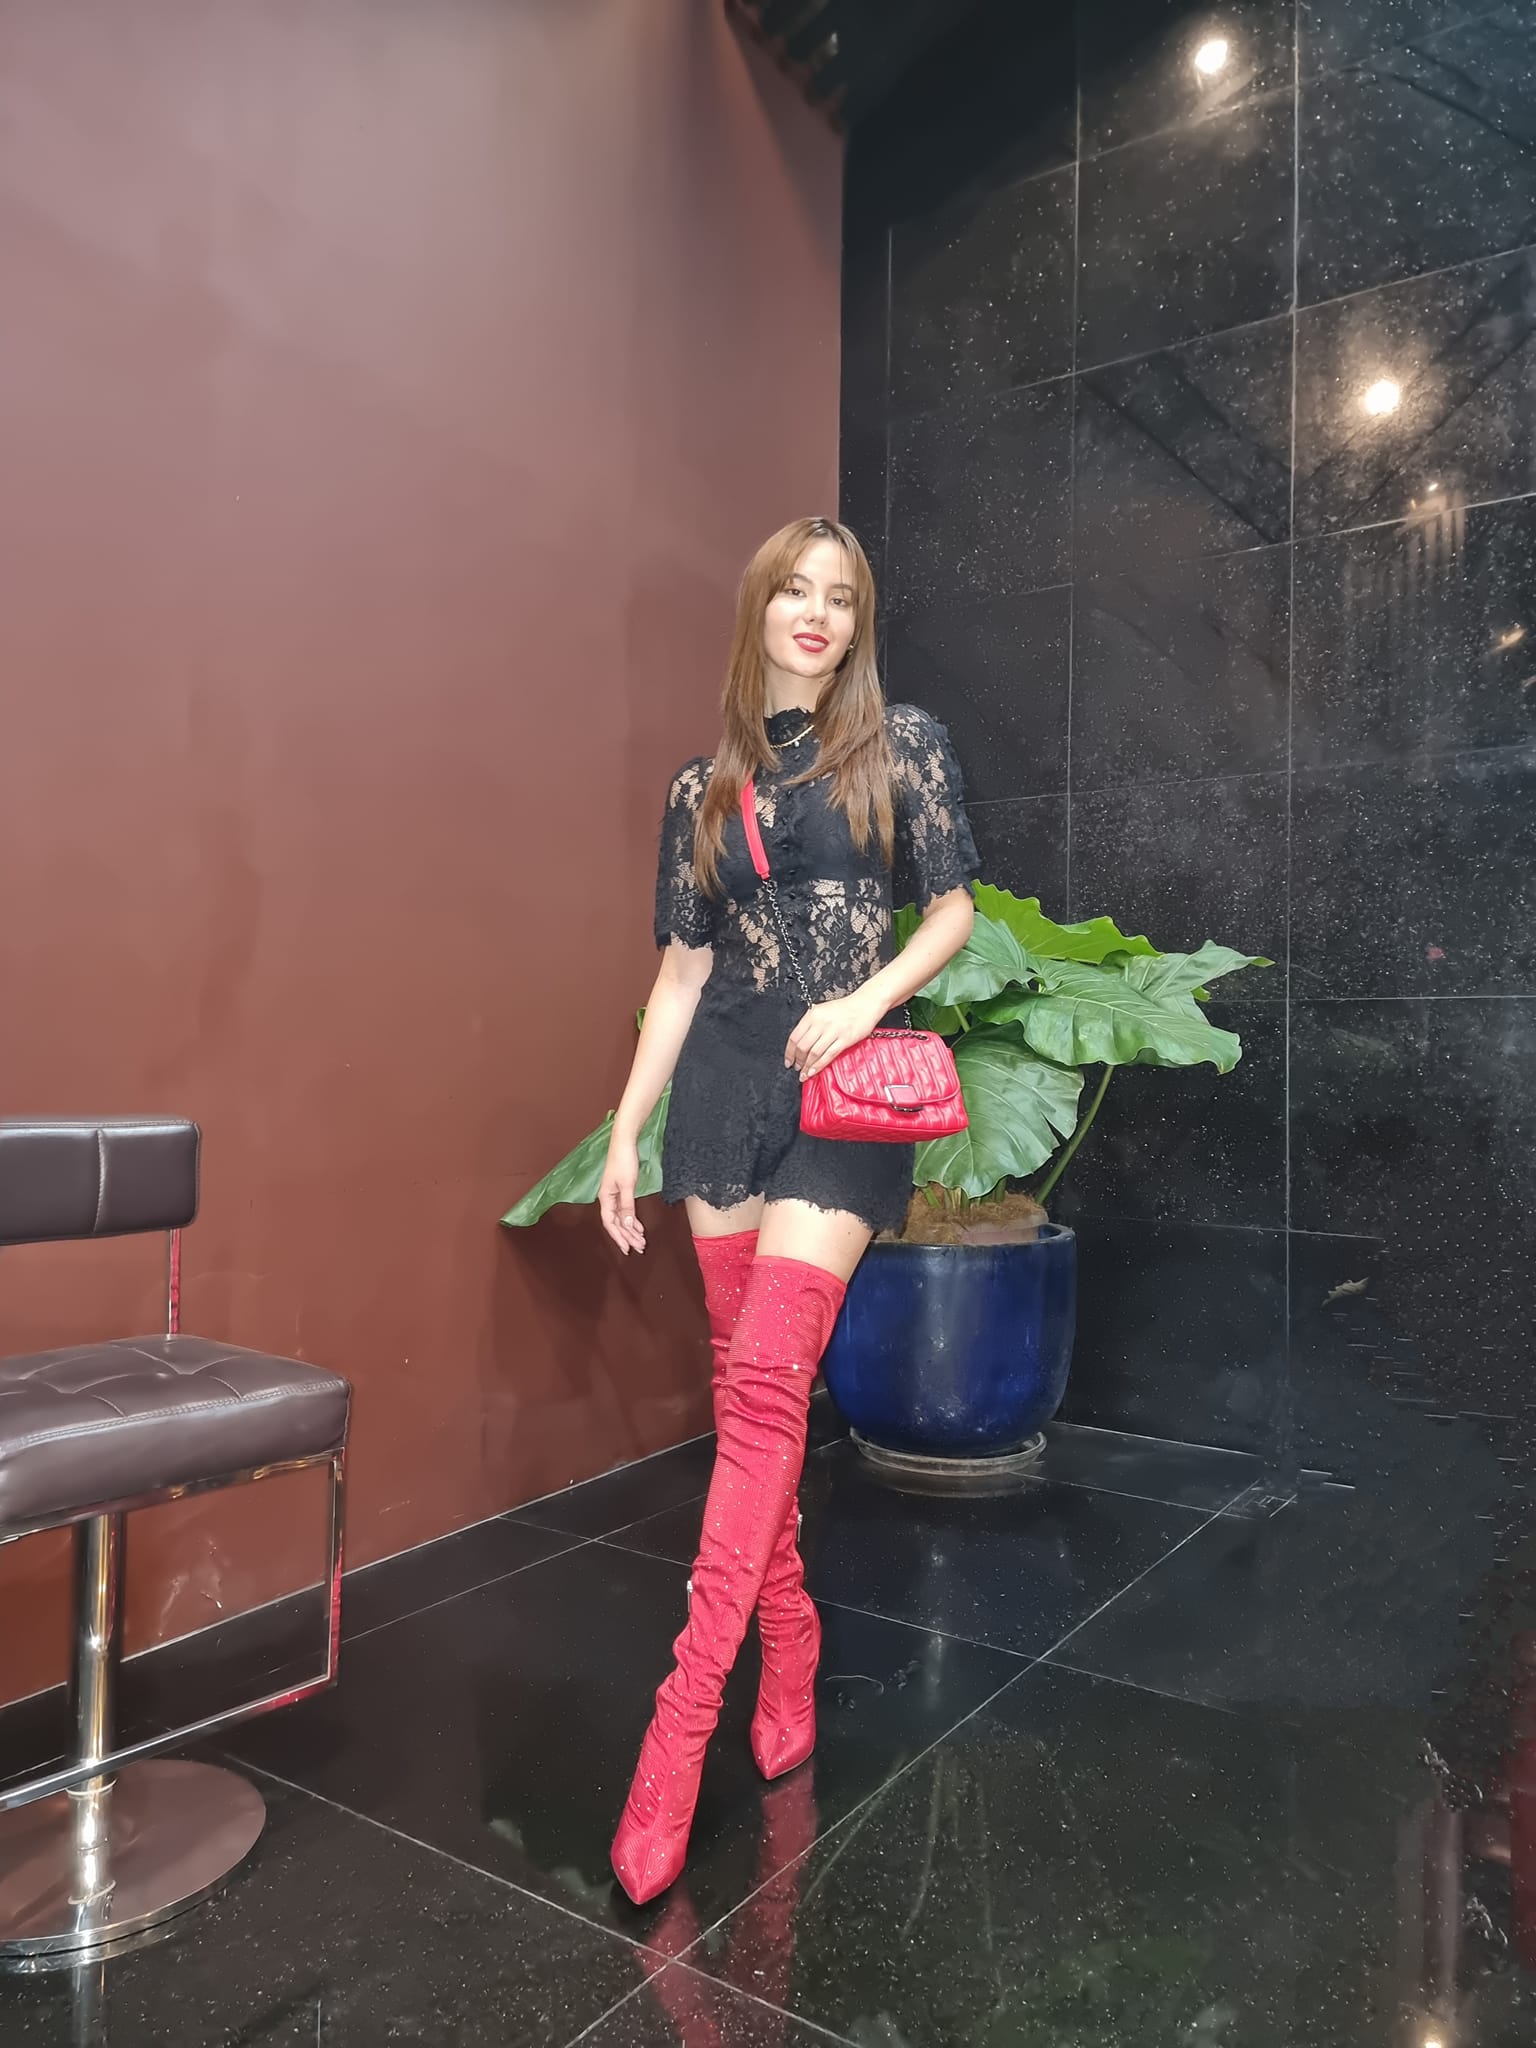 Catriona Gray Wore a Sultry Red & Black Outfit at Ne-Yo Concert ...